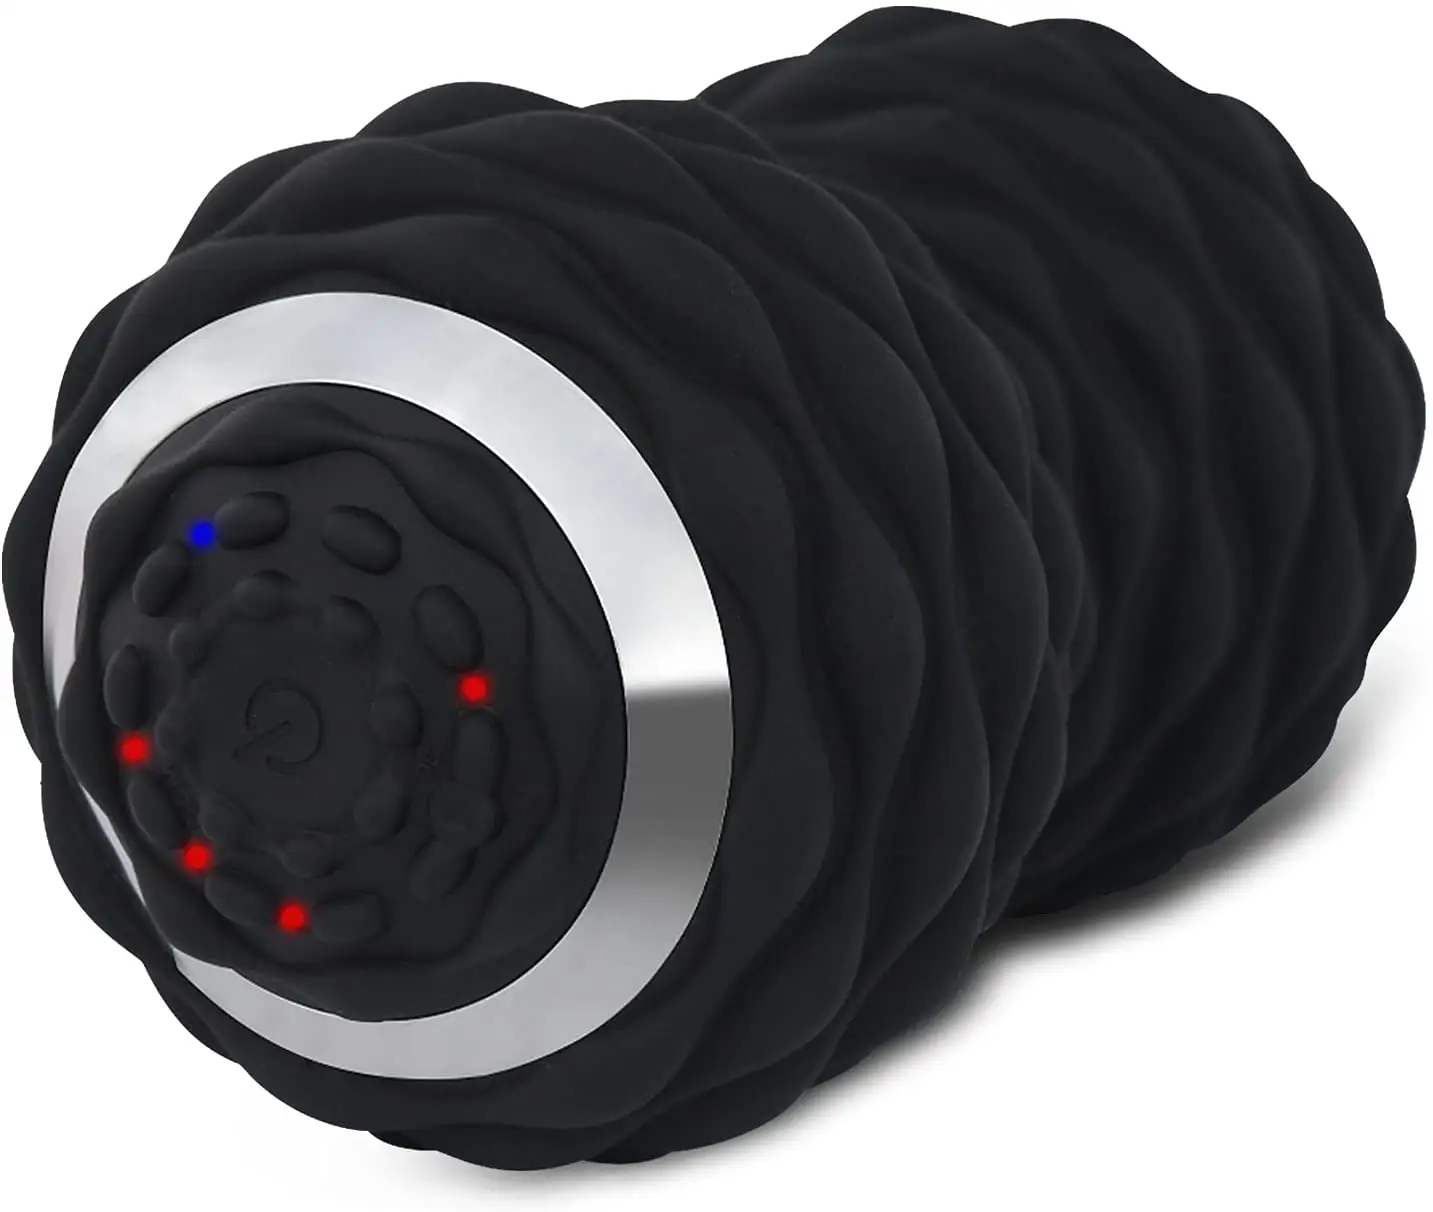 Vibrating Massage Ball 4-Speed High Intensity Fitness Yoga Massage Roller for Relieving Muscle Tension Pain Deep Tissue